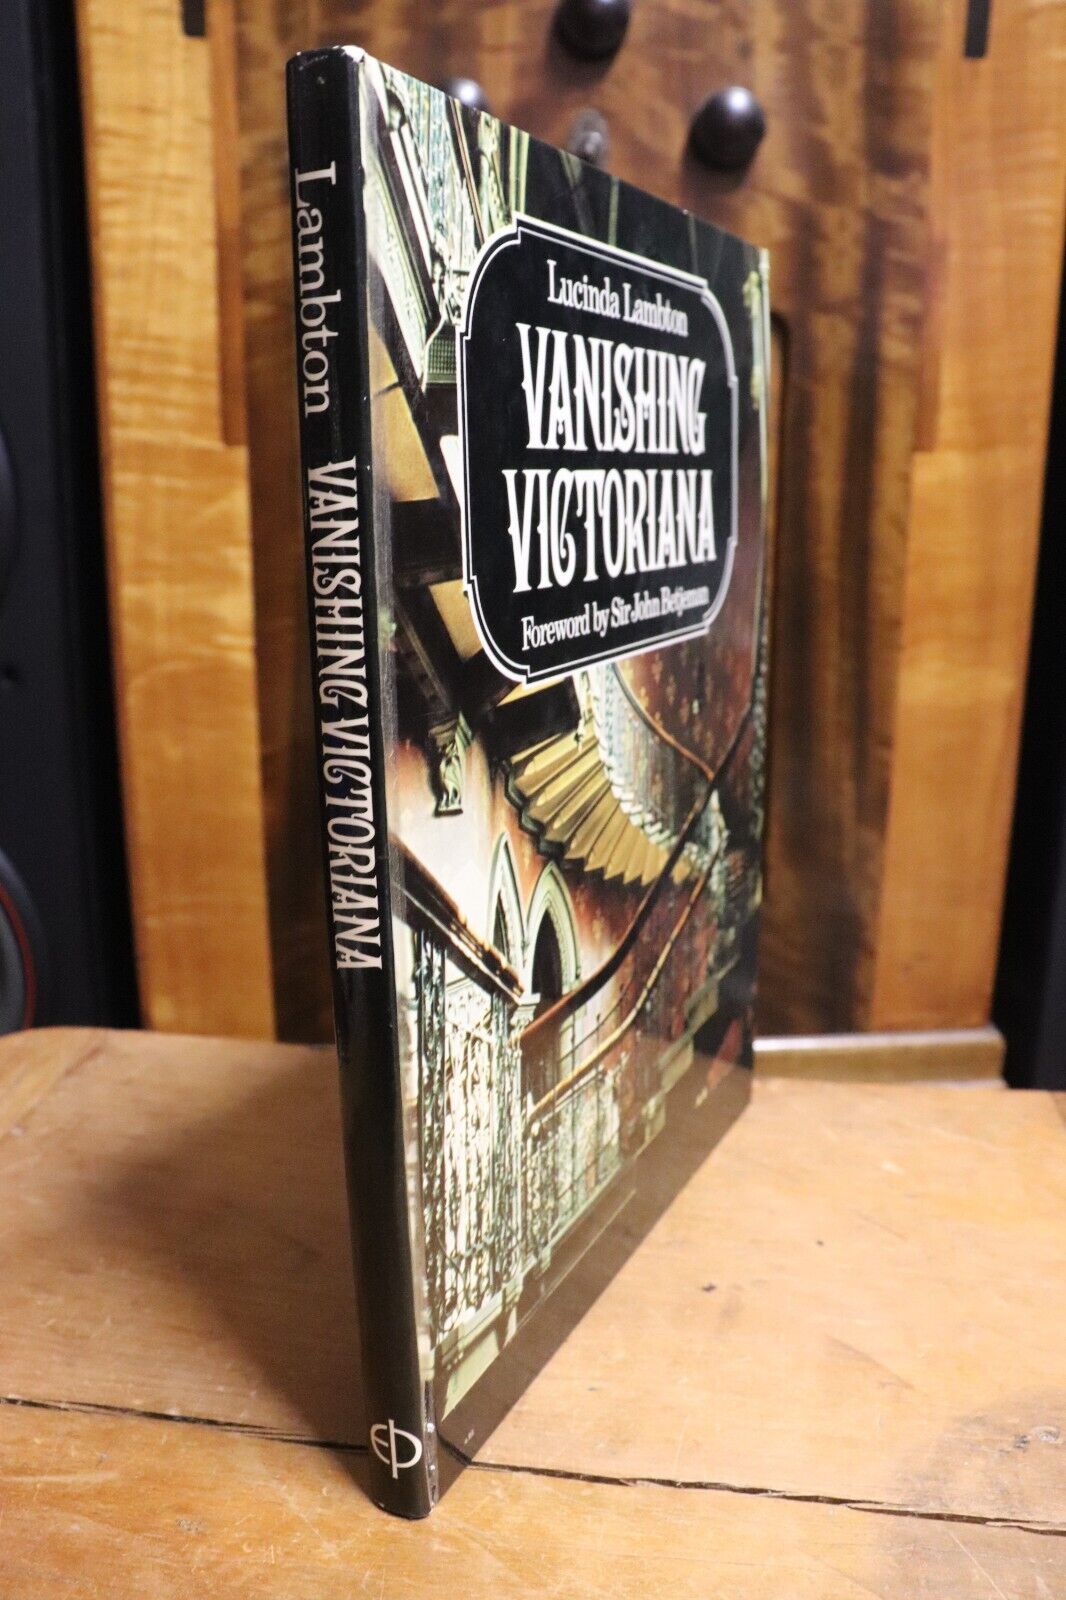 Vanishing Victoriana by L Lambton - 1976 - Architecture Reference Book - 0